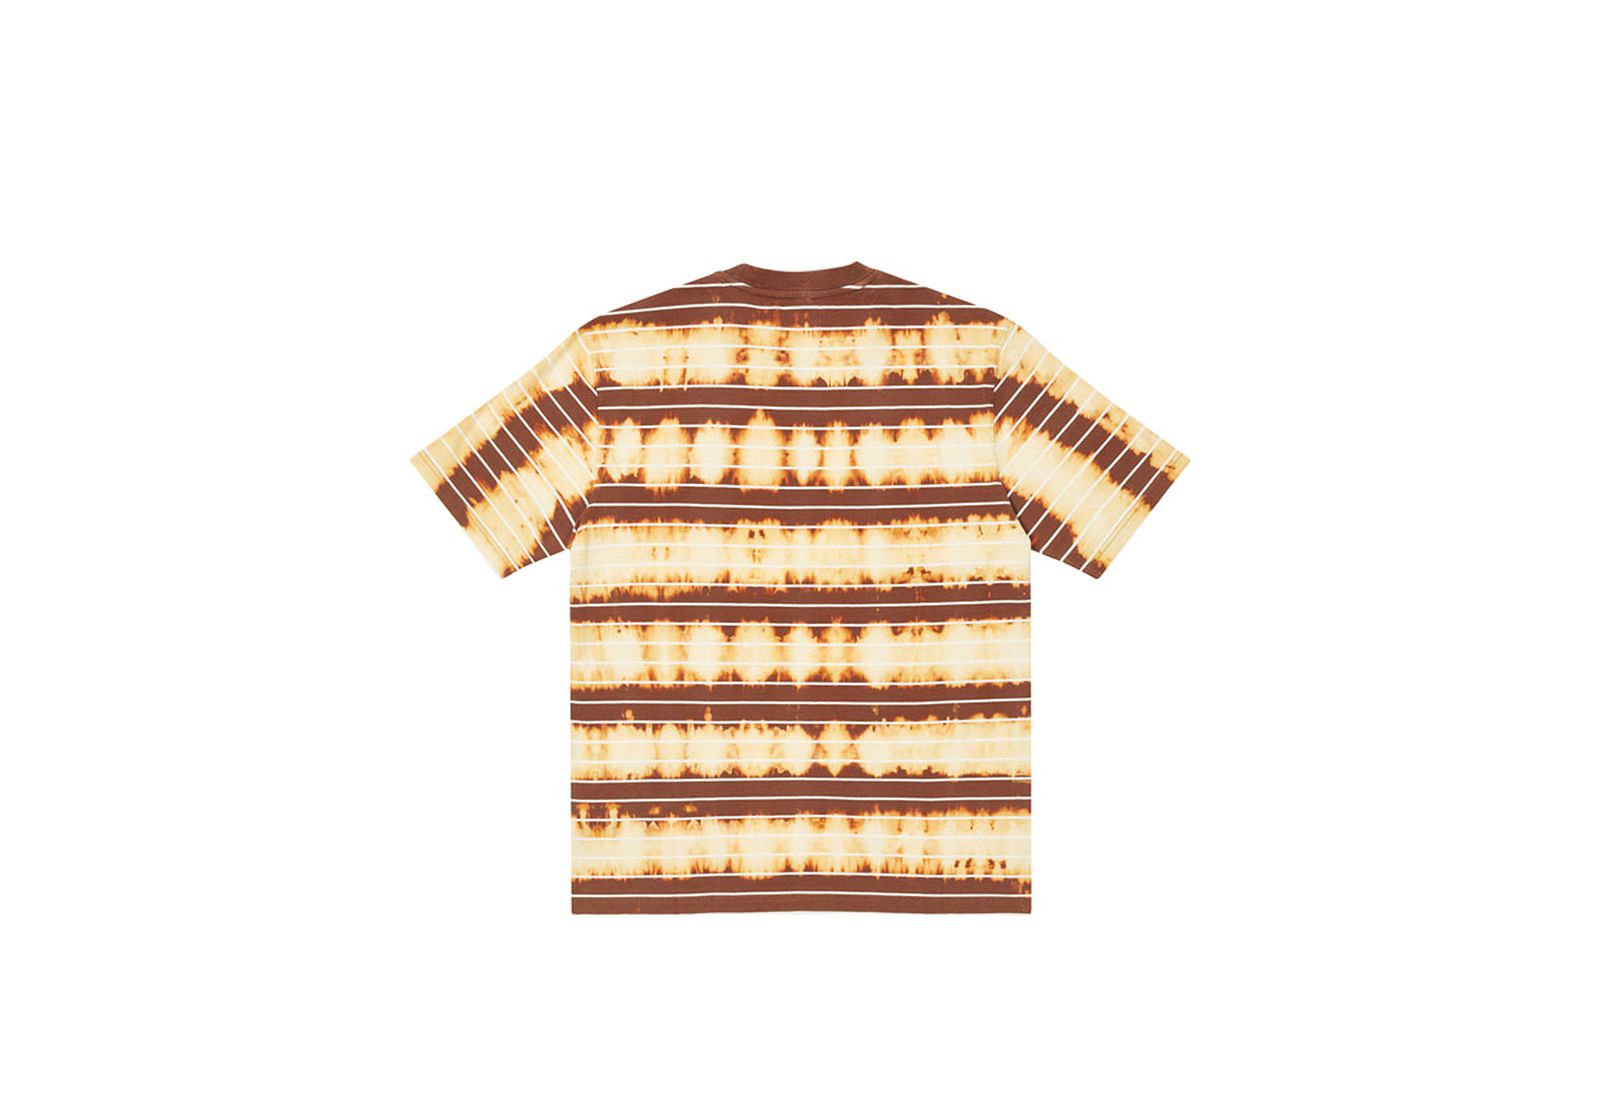 Palace_Summer_22_T_shirt_tie_bwn_12698